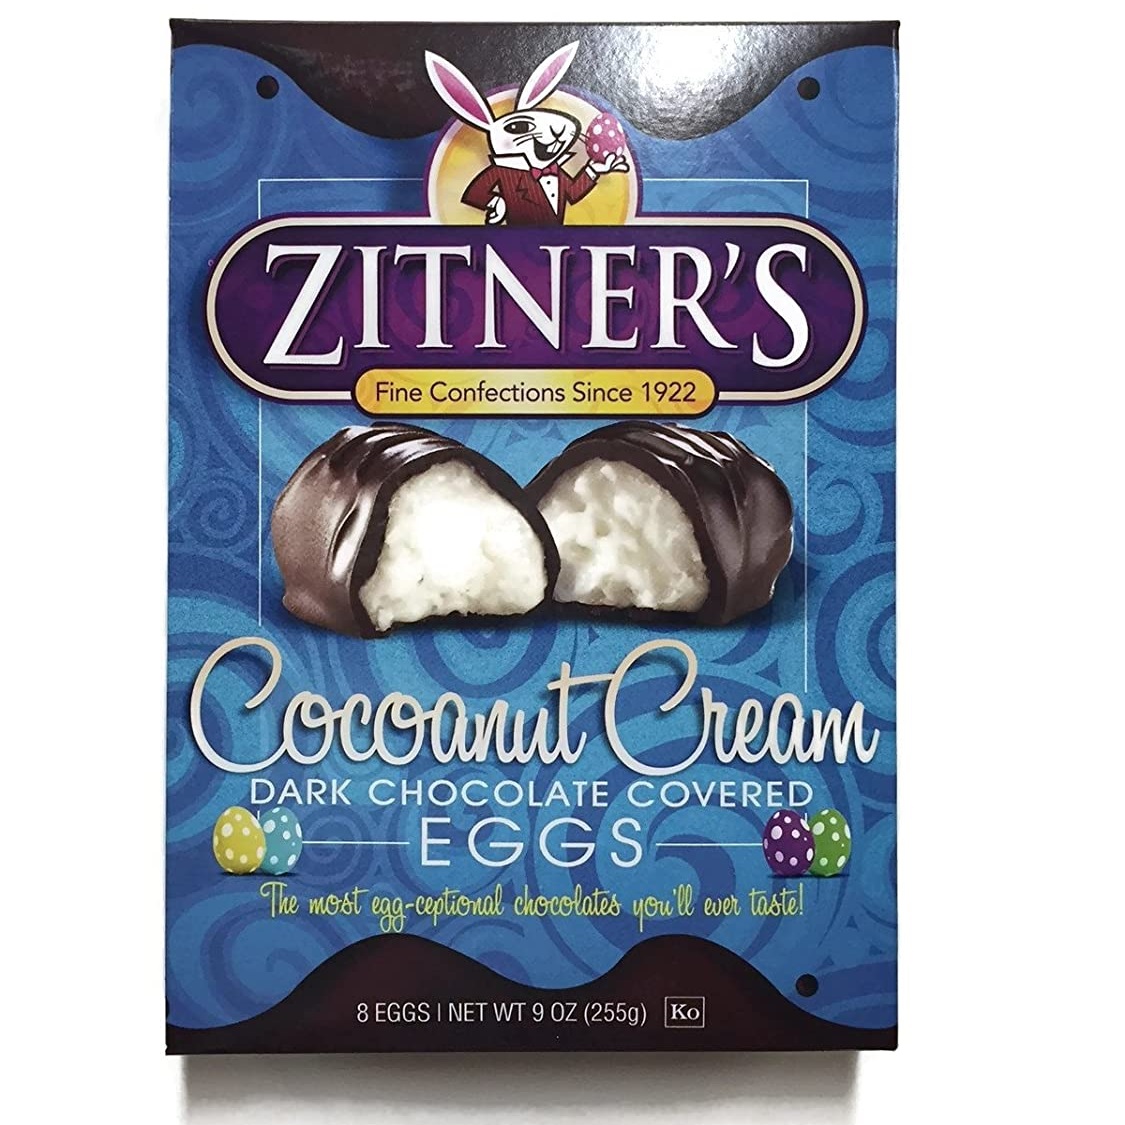 Dairy-Free and Vegan Alternatives to Cadbury Creme Eggs, including chocolate eggs with various cream fillings. US, Canada, UK, Europe, and Australian options! Pictured: Zitner's Cocoanut Cream Eggs